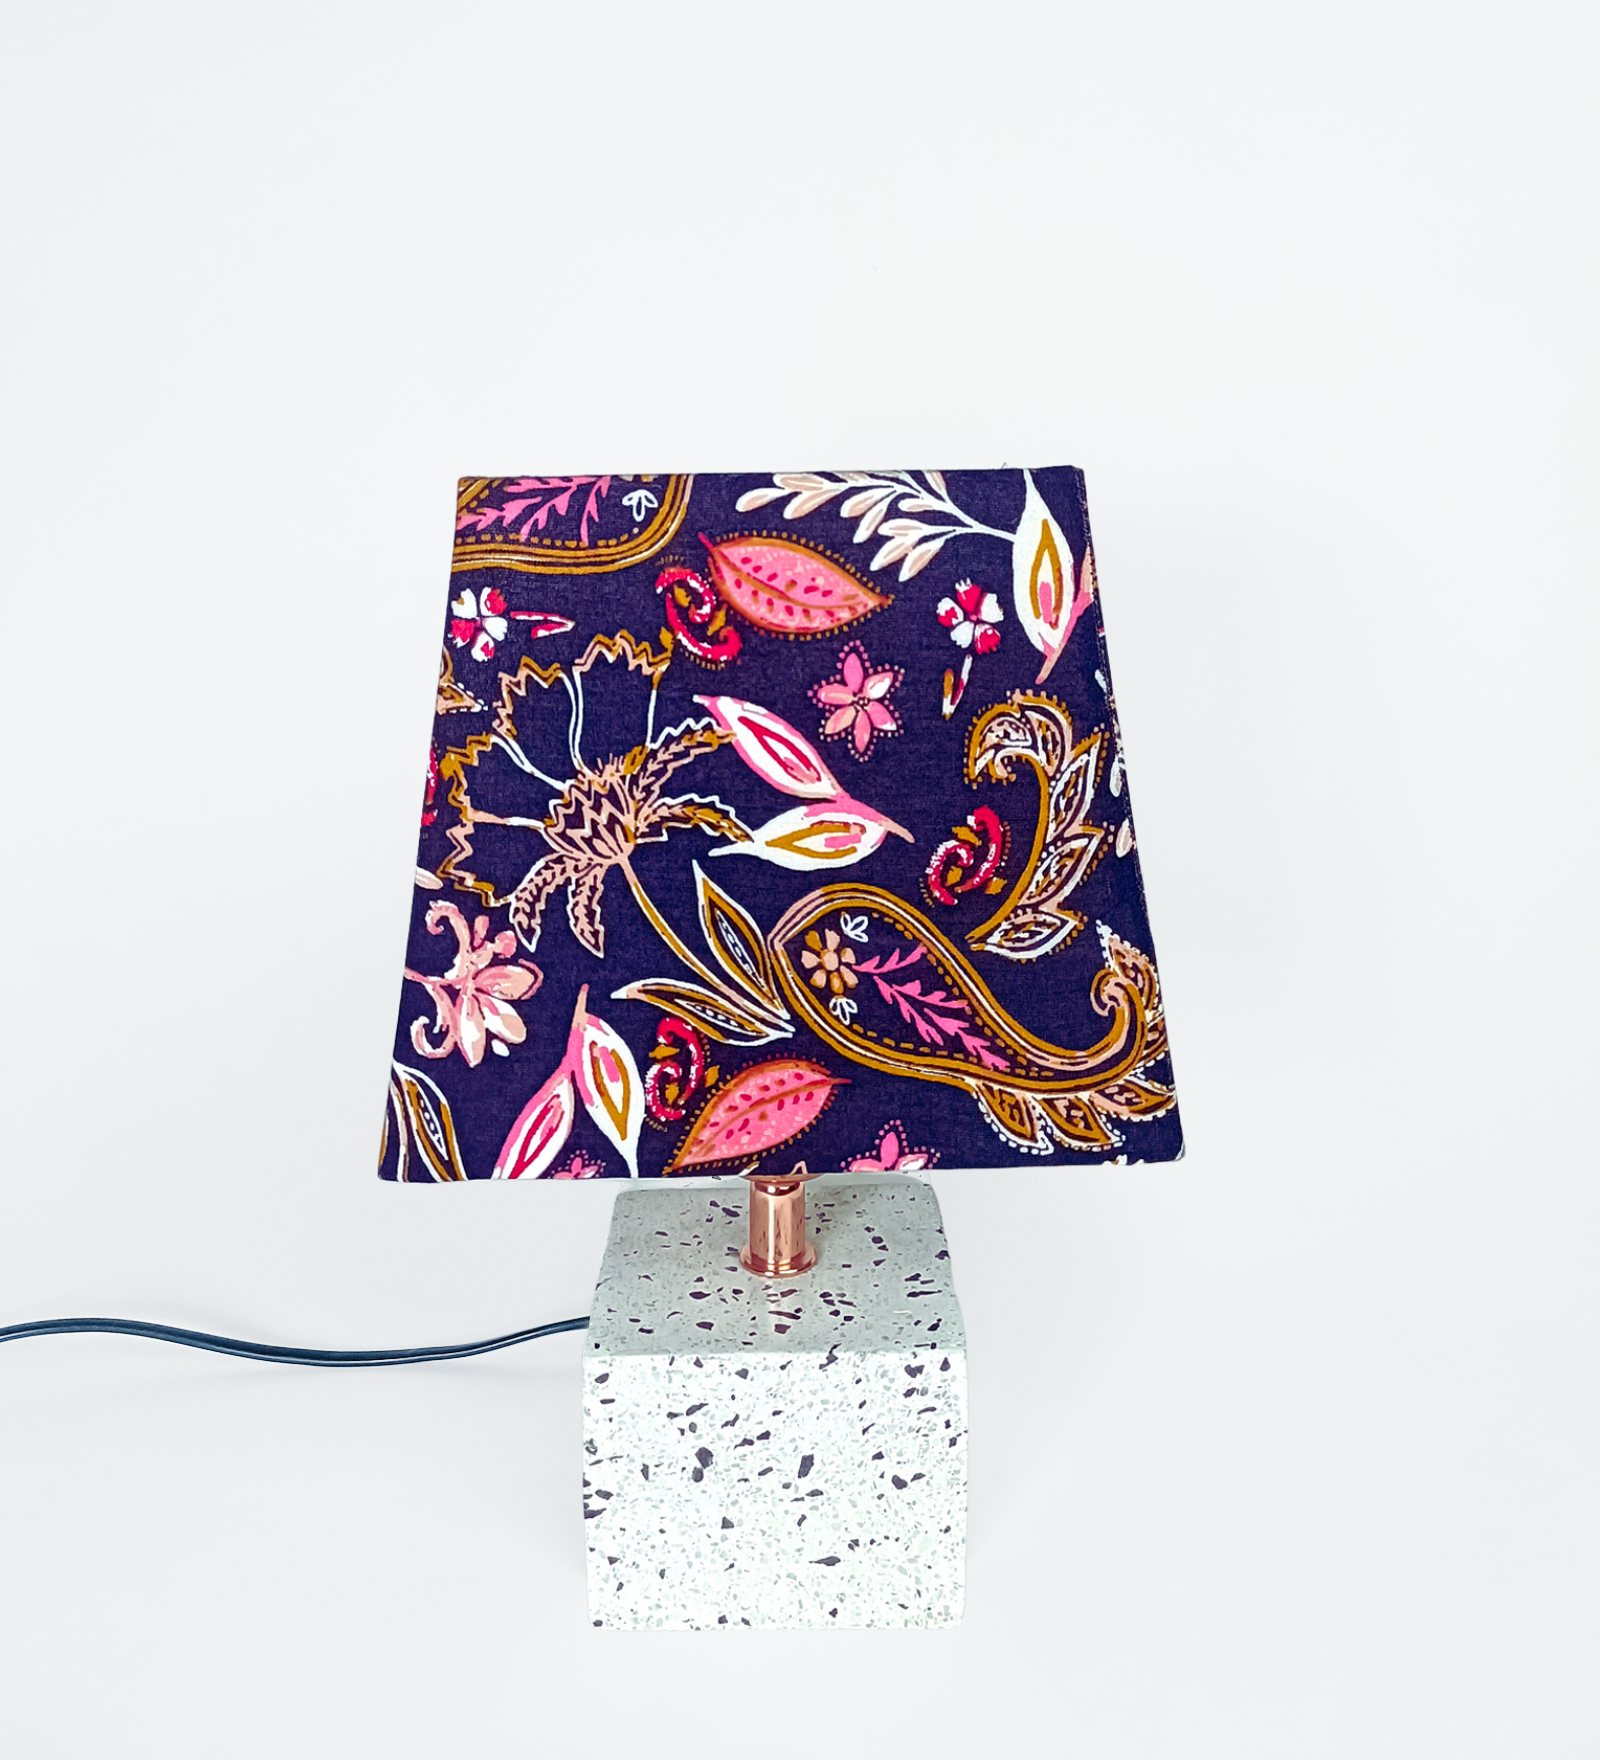 Divine Marble Table lamp